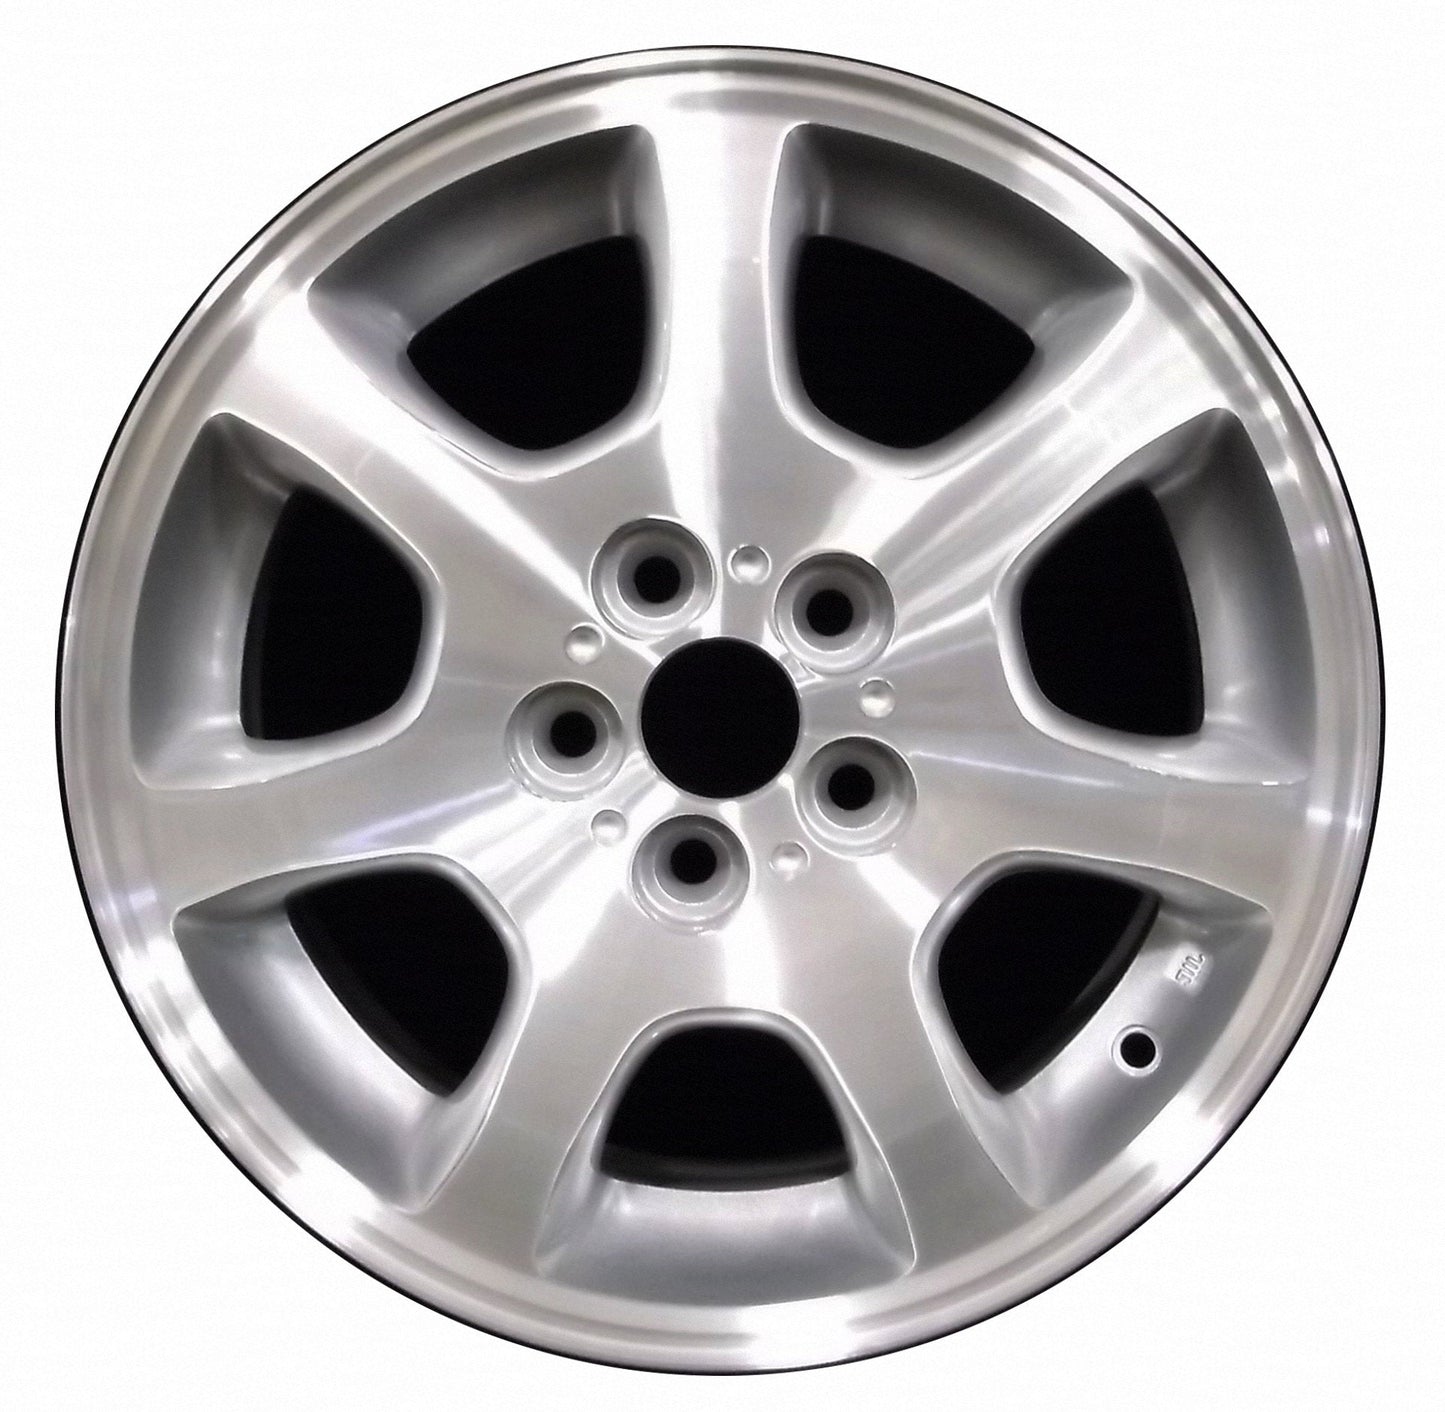 Dodge Neon  2002, 2003, 2004, 2005 Factory OEM Car Wheel Size 15x6 Alloy WAO.2181A.PS02.MA